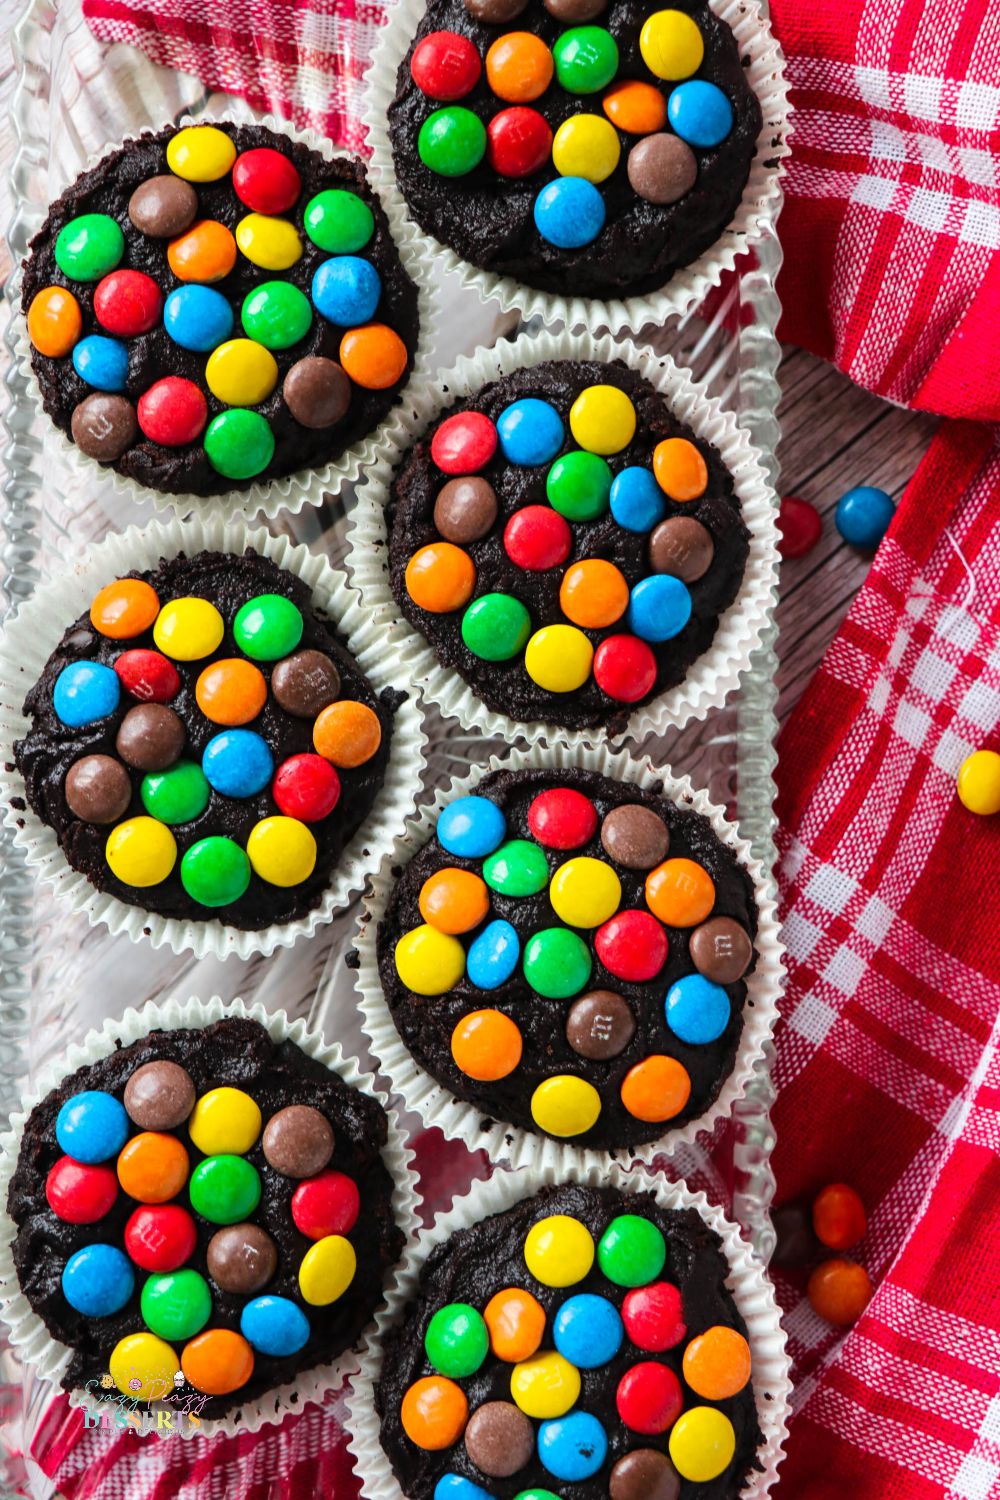 Over head image of a few chocolate frosting cupcakes decorated with M&M's